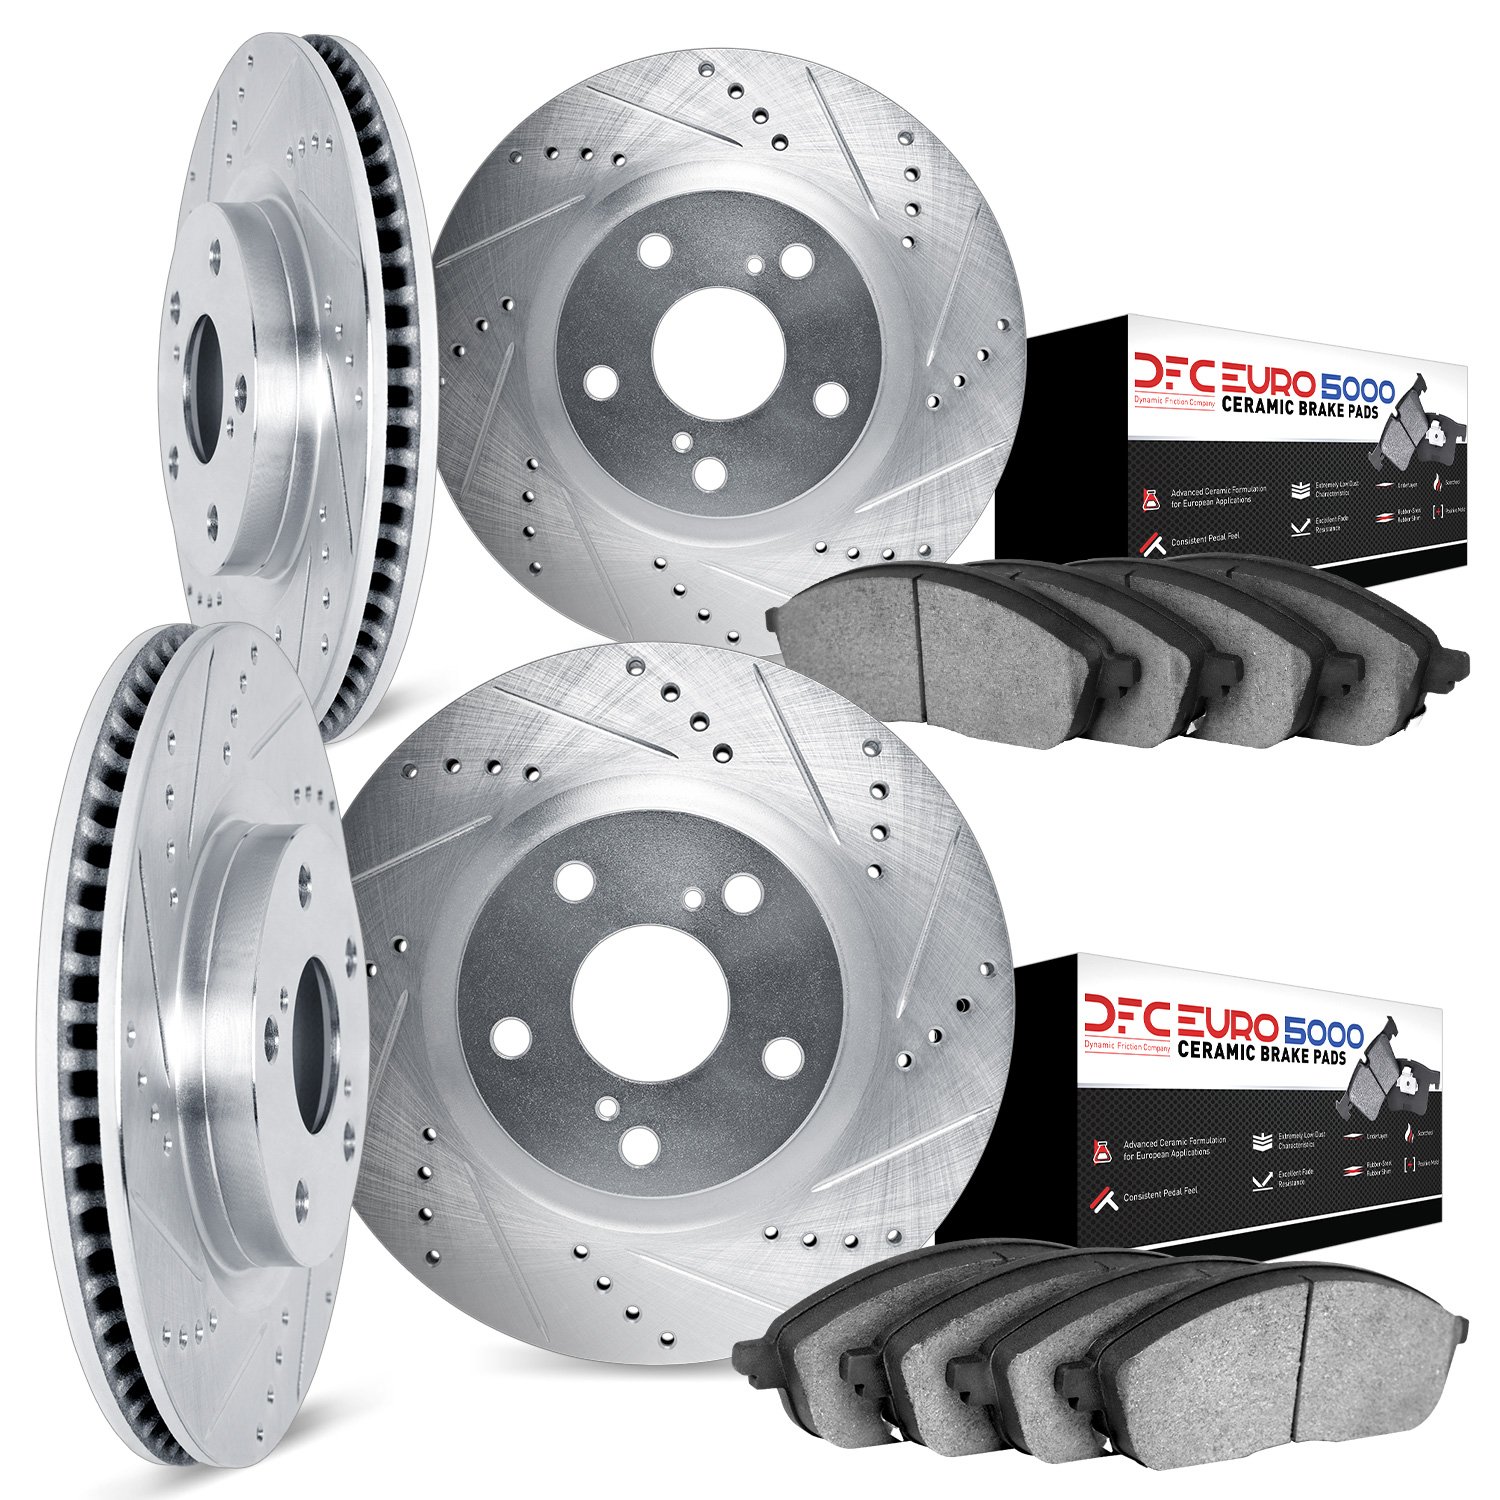 7604-31029 Drilled/Slotted Brake Rotors w/5000 Euro Ceramic Brake Pads Kit [Silver], 2013-2018 BMW, Position: Front and Rear